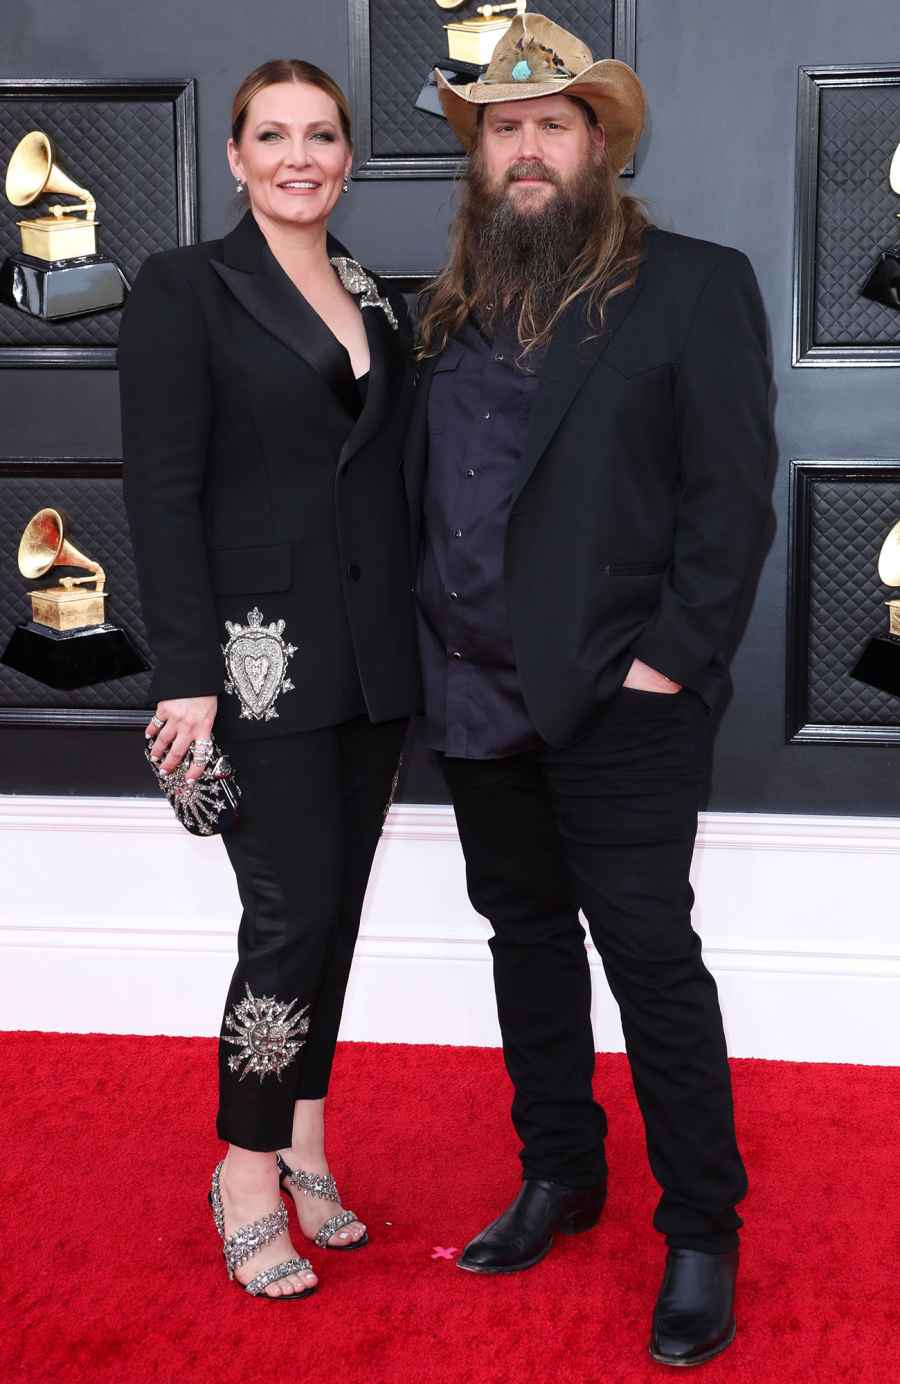 Stapletons in Style! See Chris and Morgane's Grammys Date Night